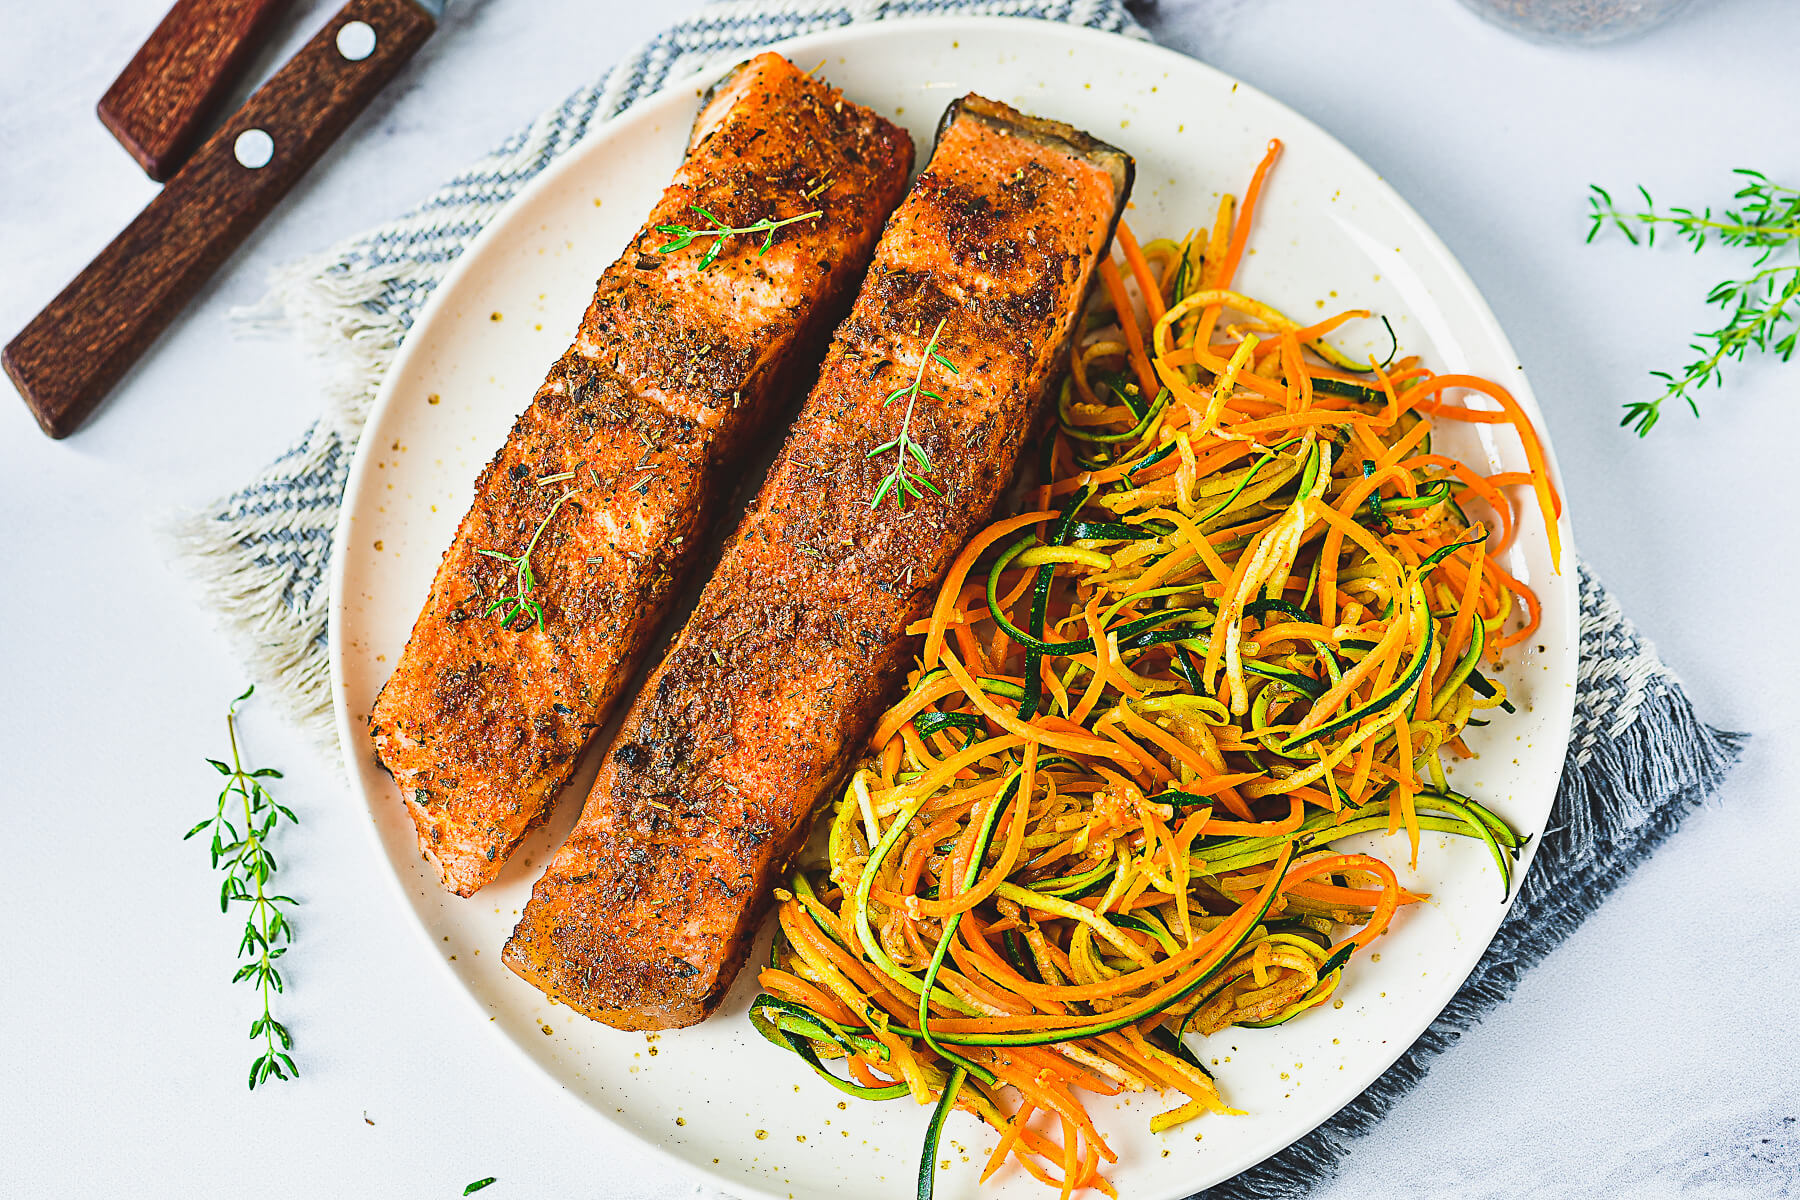 Two cooked spiced salmon fillets on a plate beside spiralized vegetables.